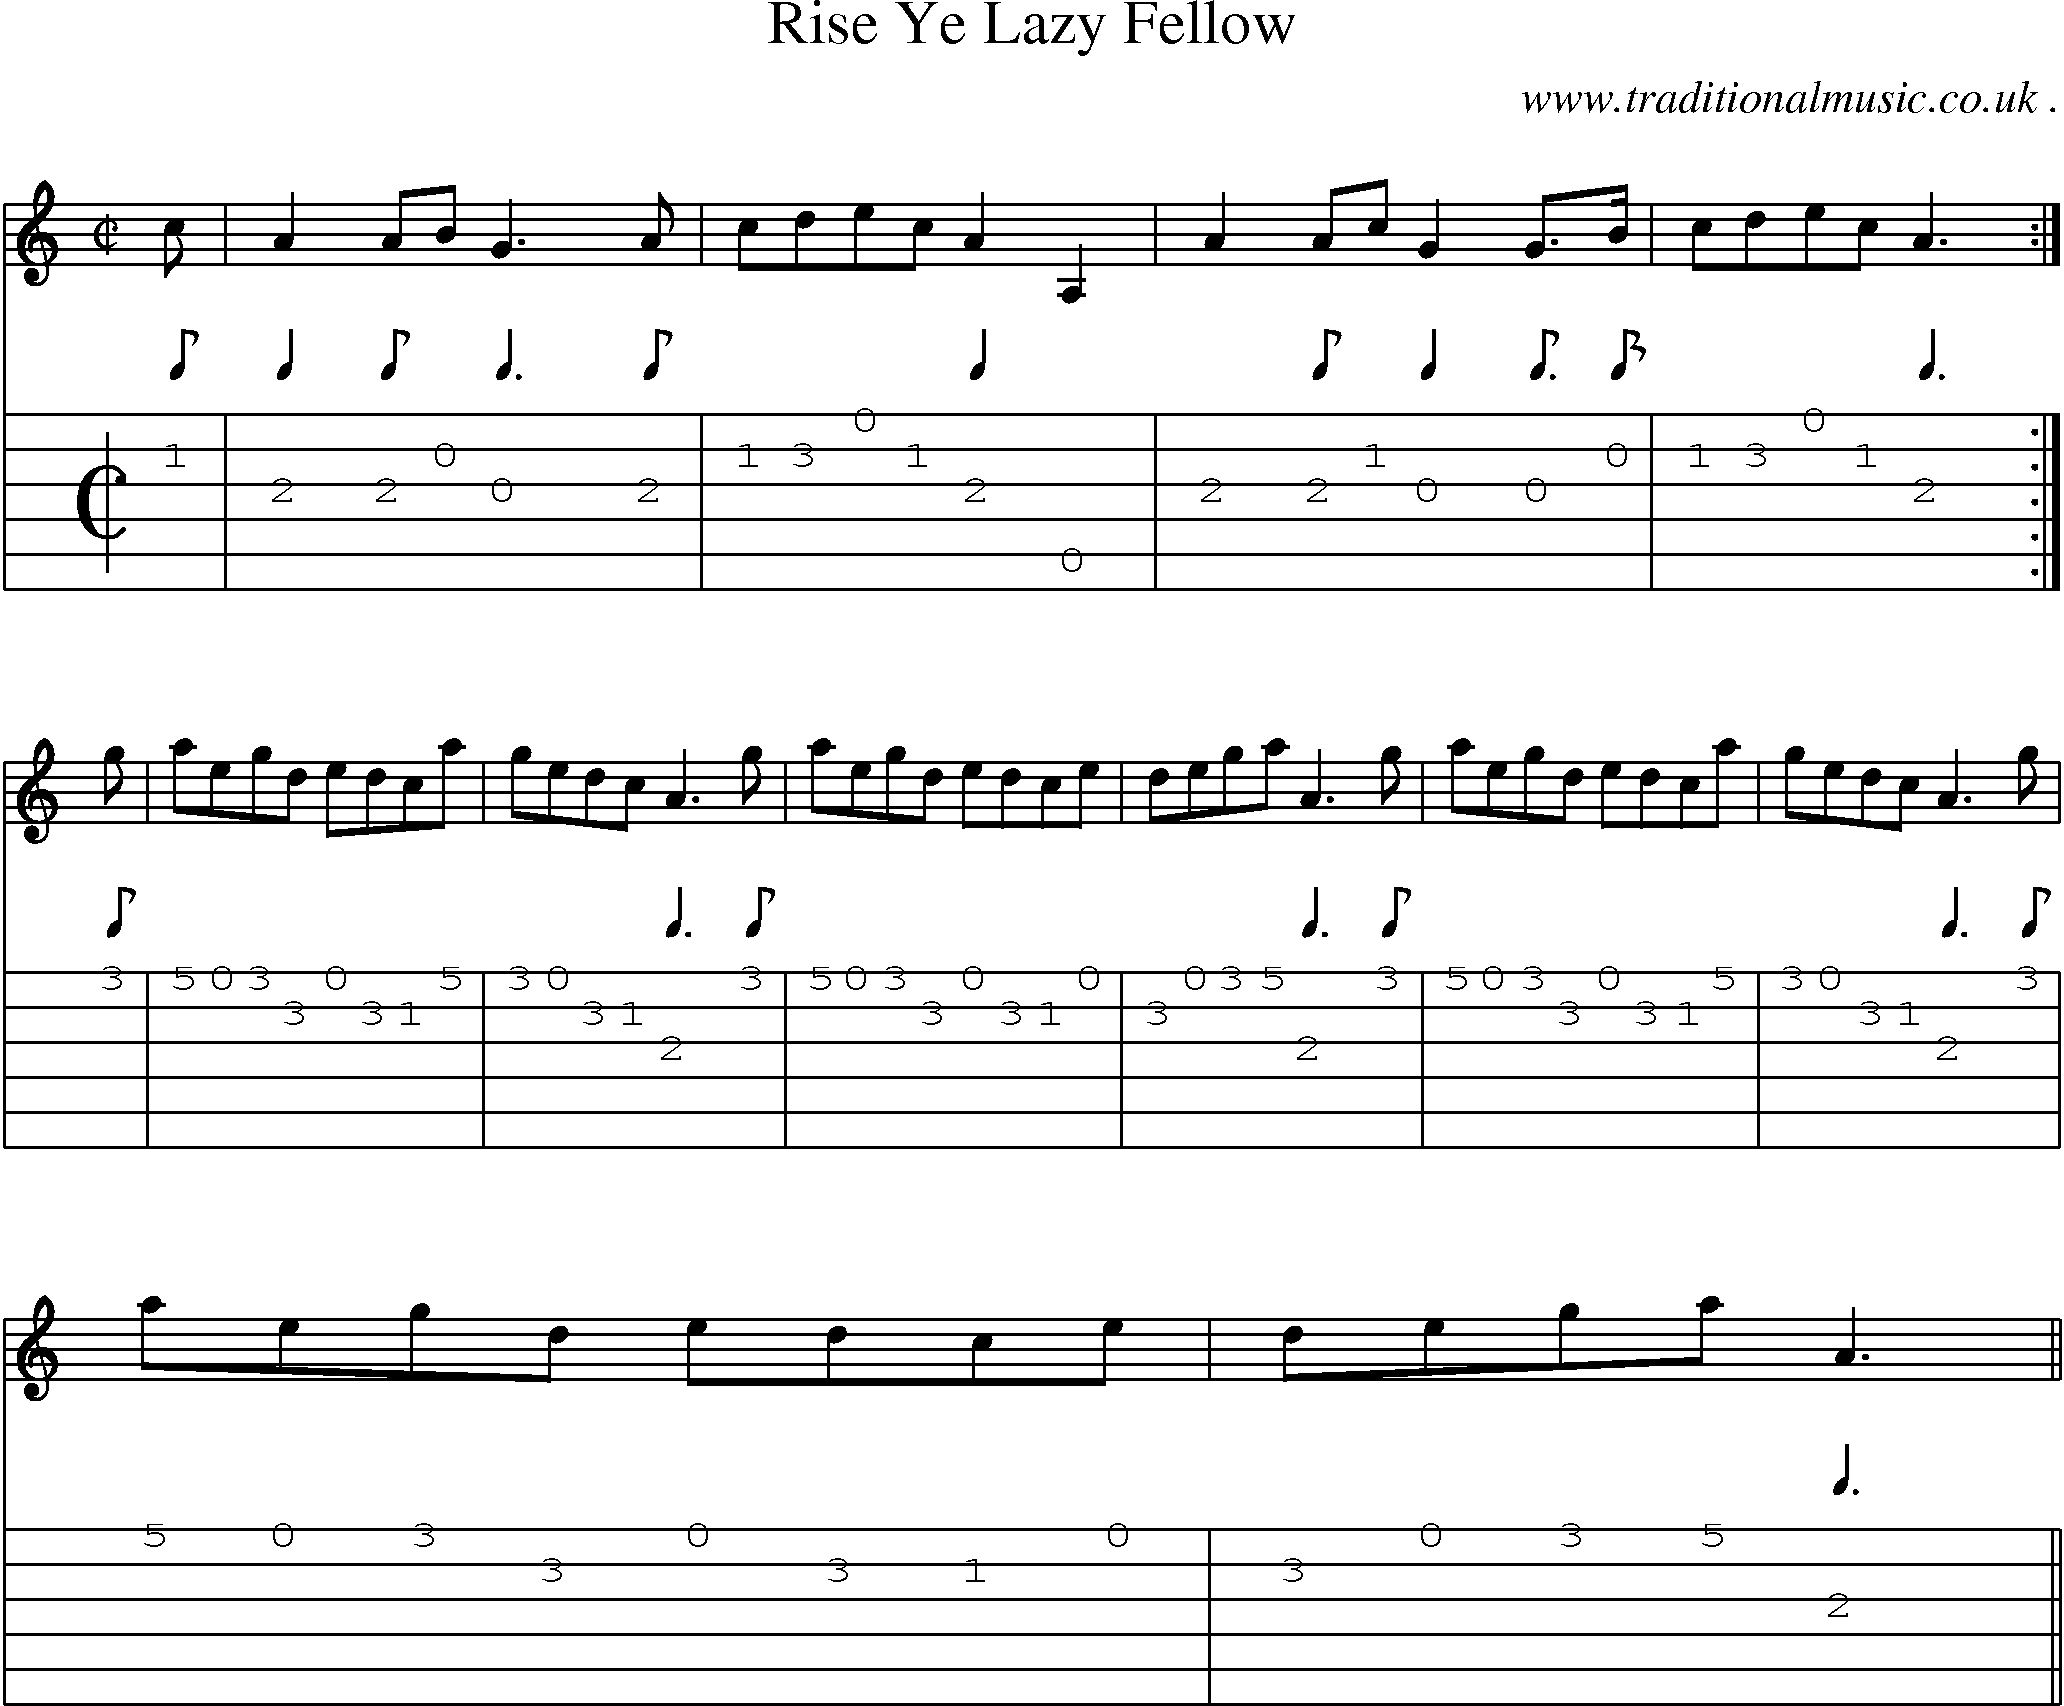 Sheet-music  score, Chords and Guitar Tabs for Rise Ye Lazy Fellow